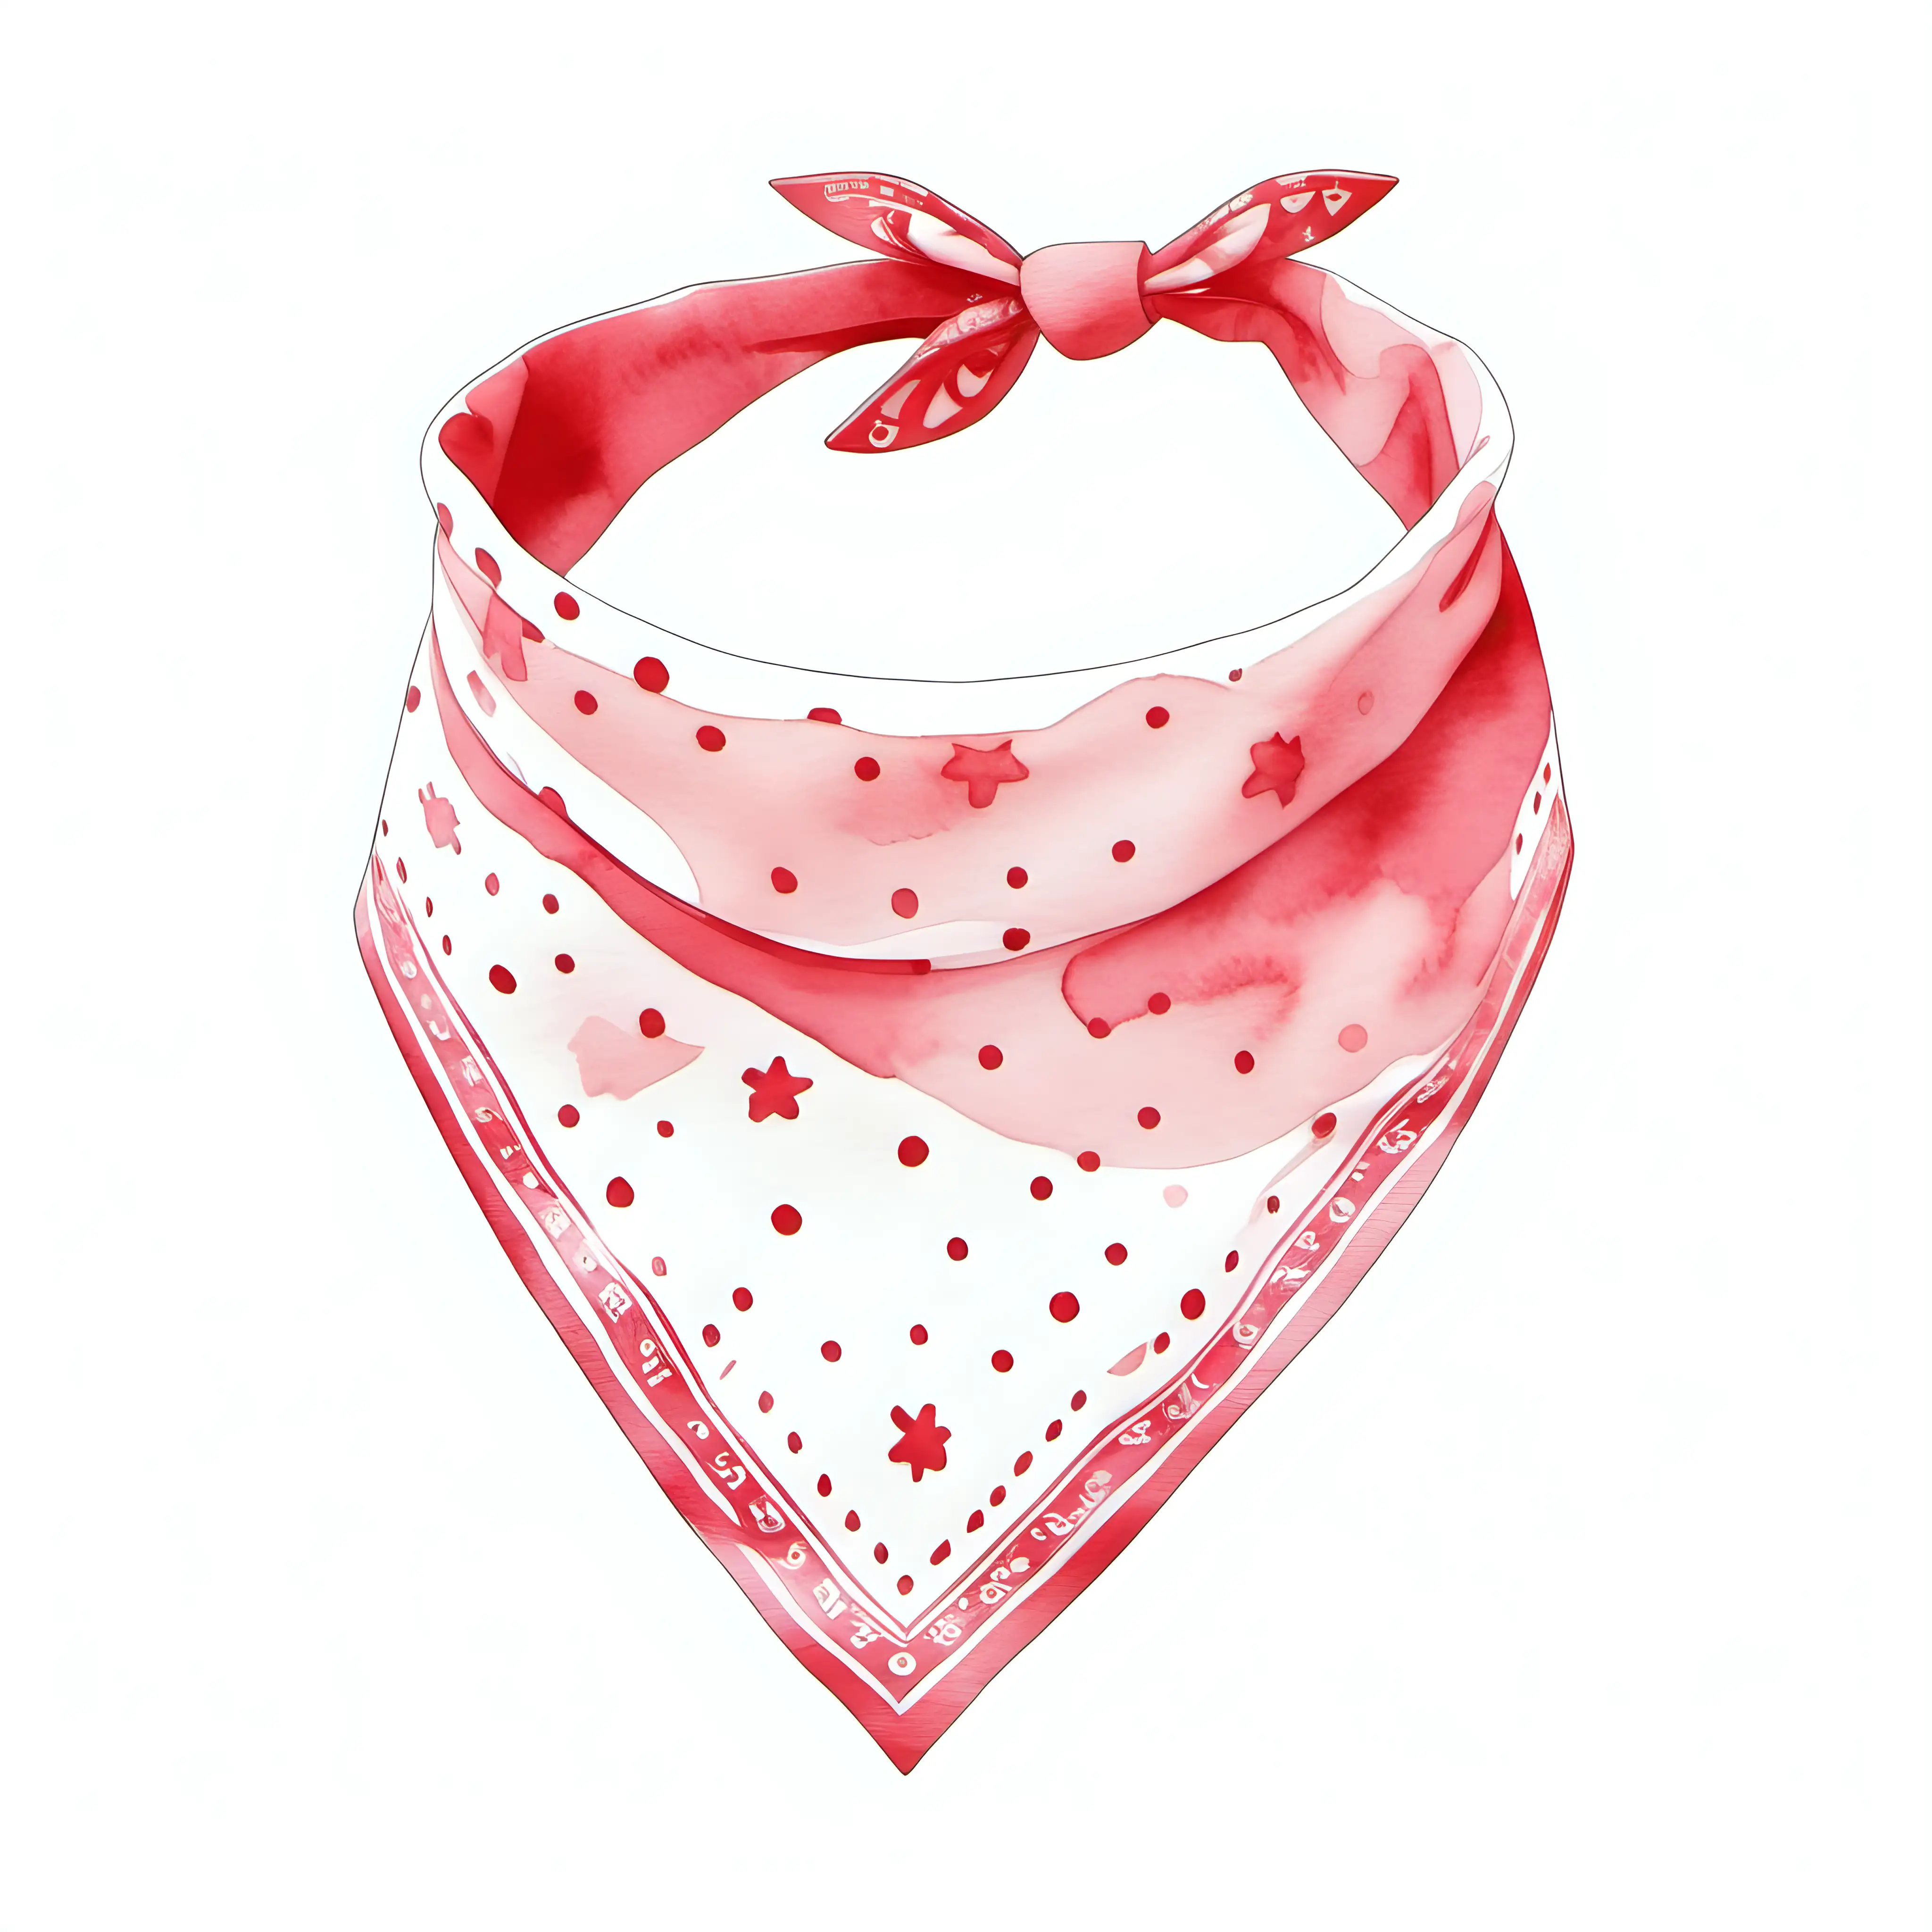 Adorable Watercolor Baby Bandana Clipart on White Background